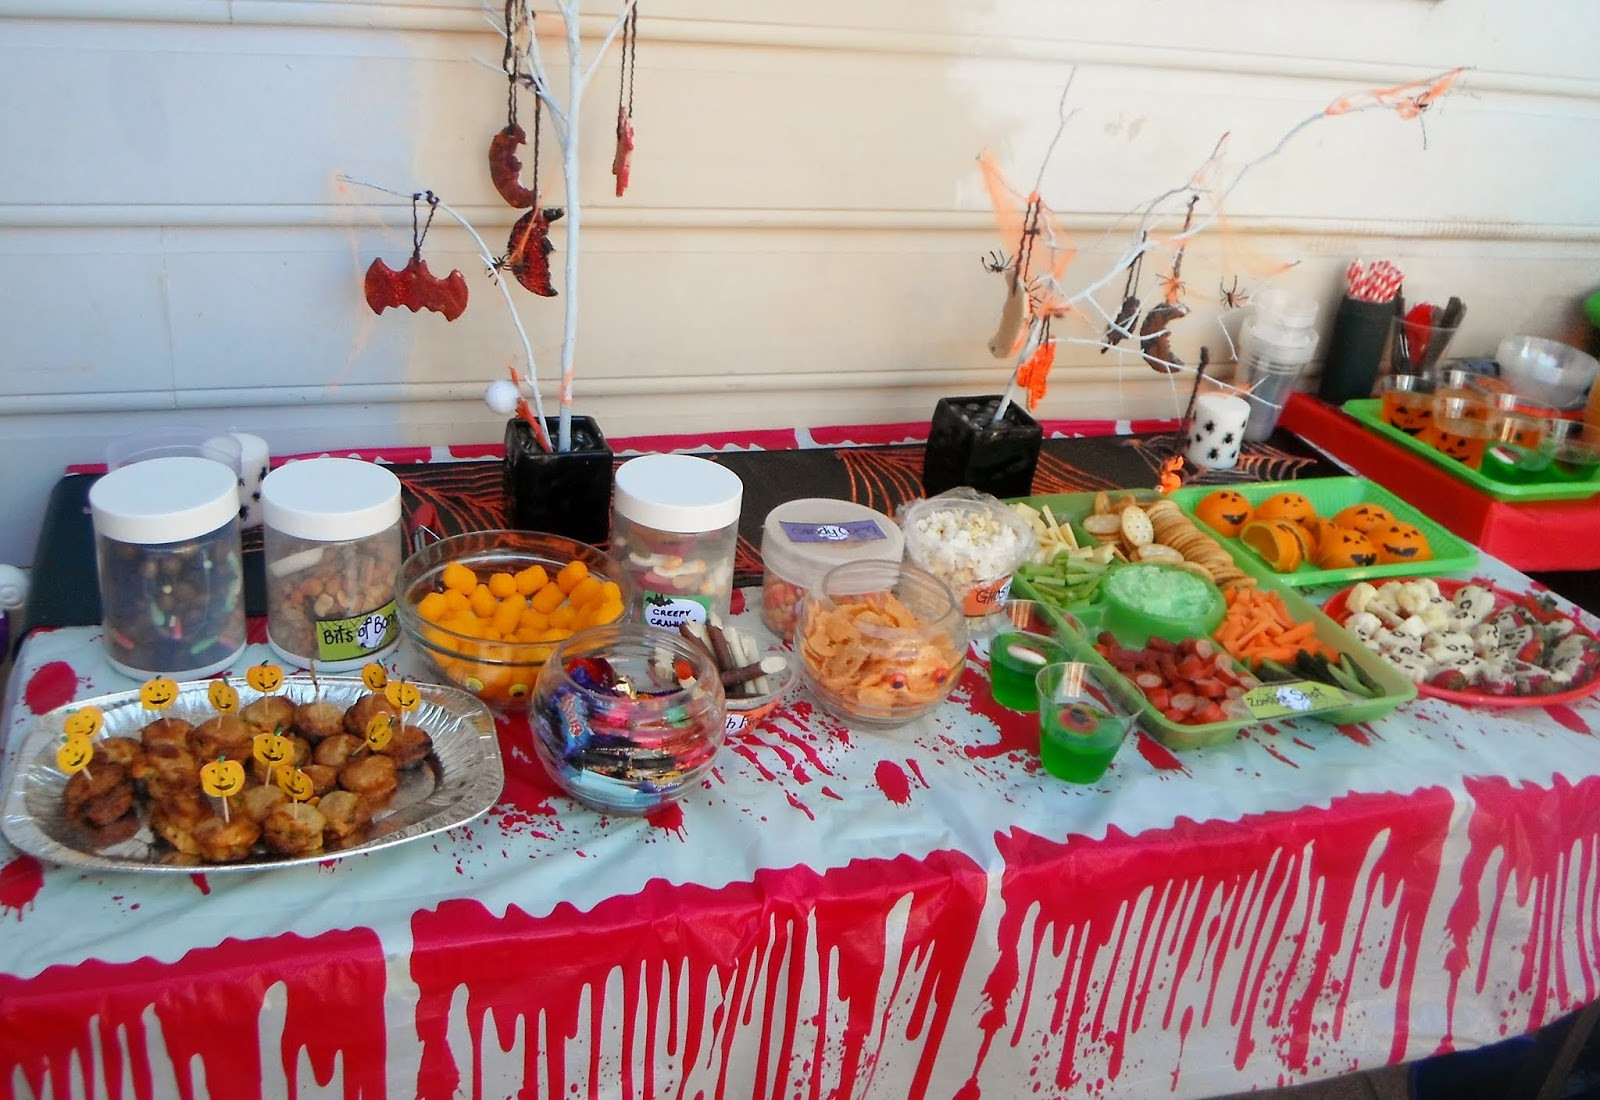 Halloween Party Menu Ideas For Adults
 Adventures at home with Mum Halloween Party Food